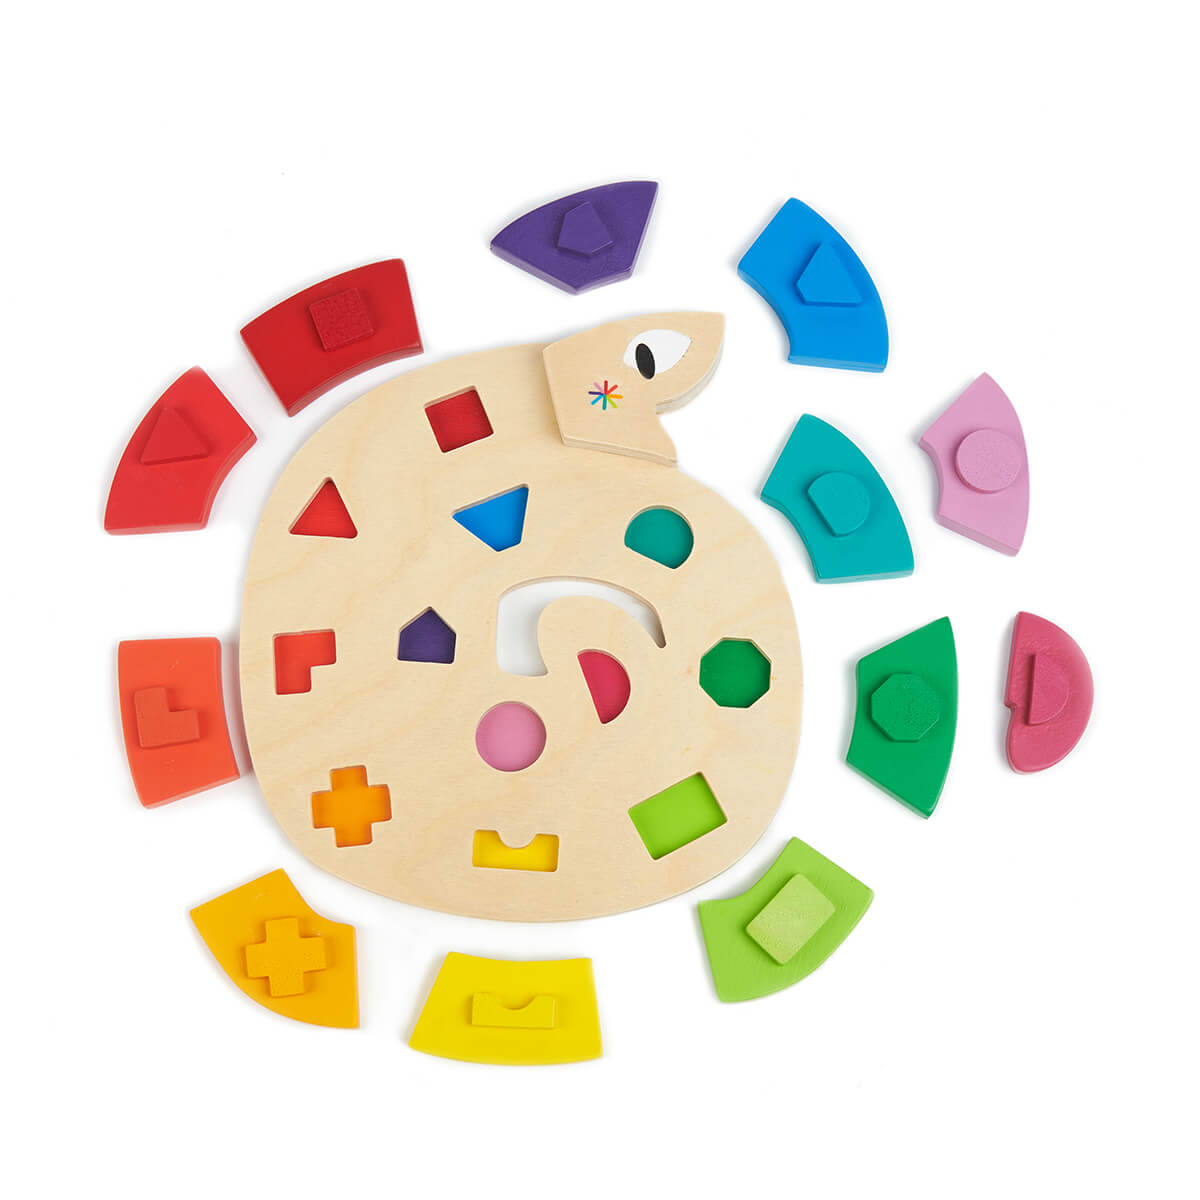 Colour Me Happy Snake Puzzle by Tender Leaf Toys – Junior Edition